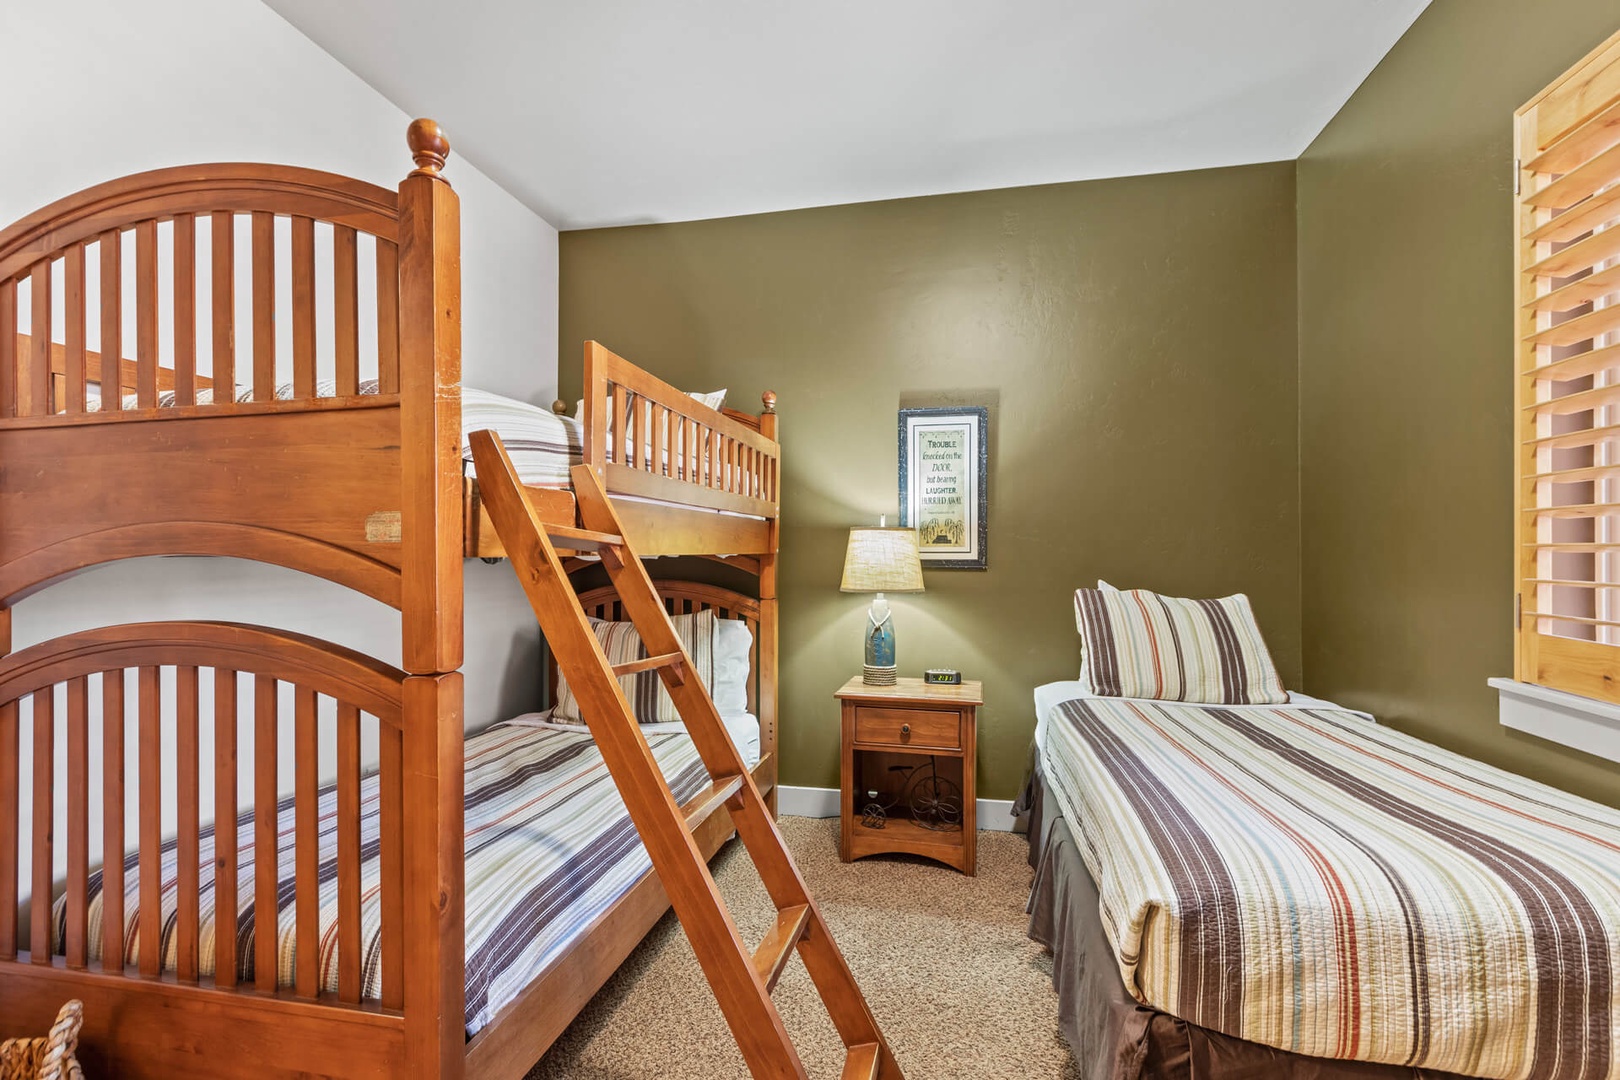 Bear Hollow Lodges 4201:  Single Bunk beds plus another single bed to accommodate all of your group.